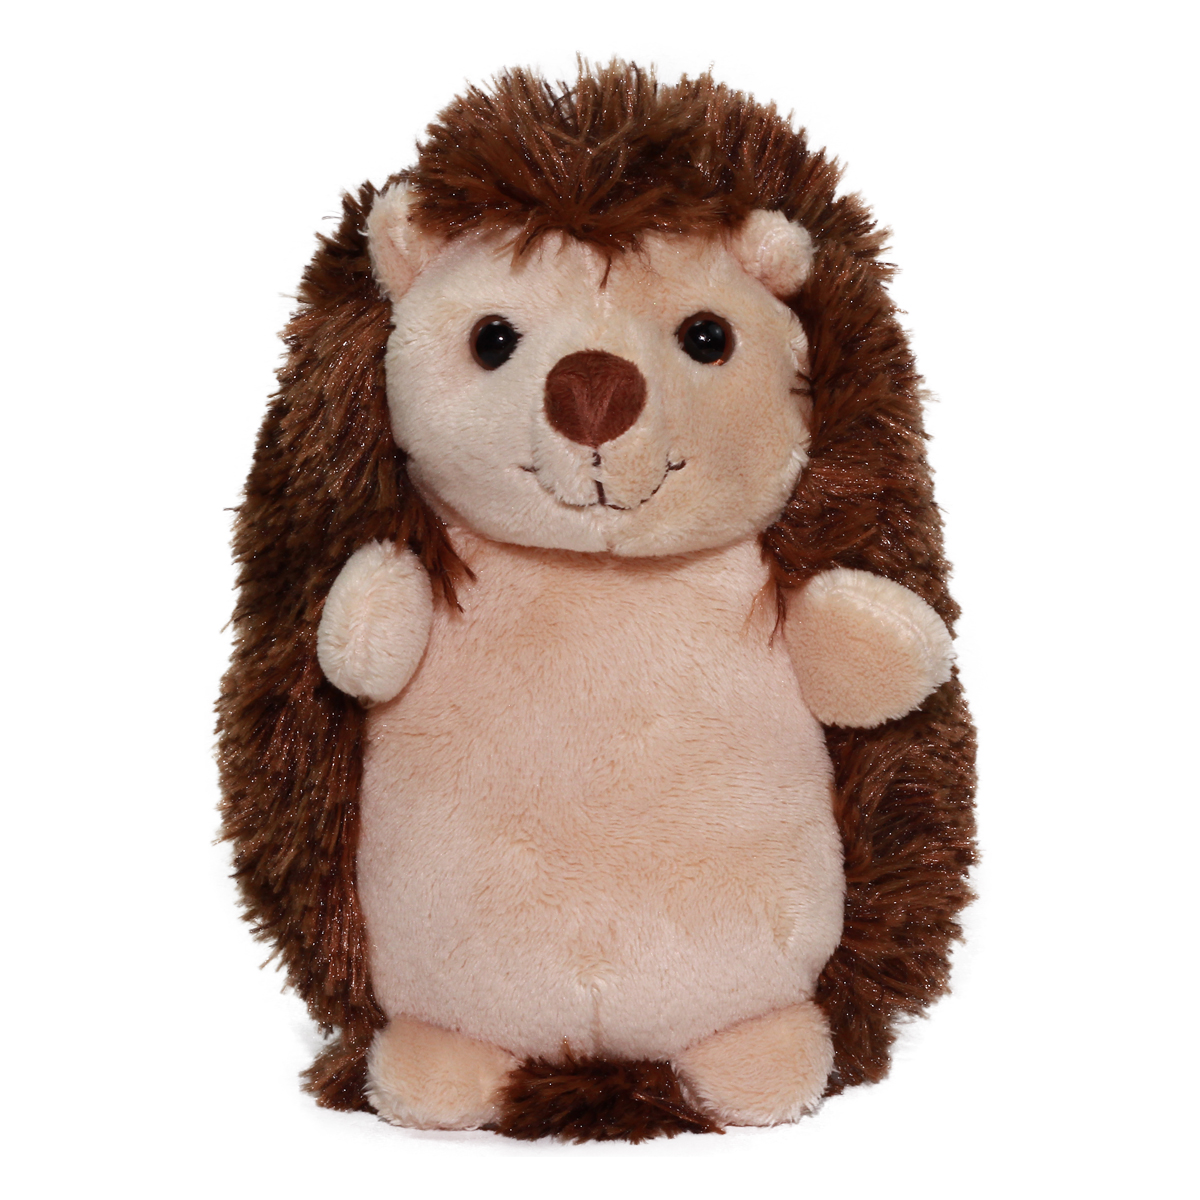 Hedgehog Stuffed Animal Unney & Cree Plush Collection Brown 7 Inches